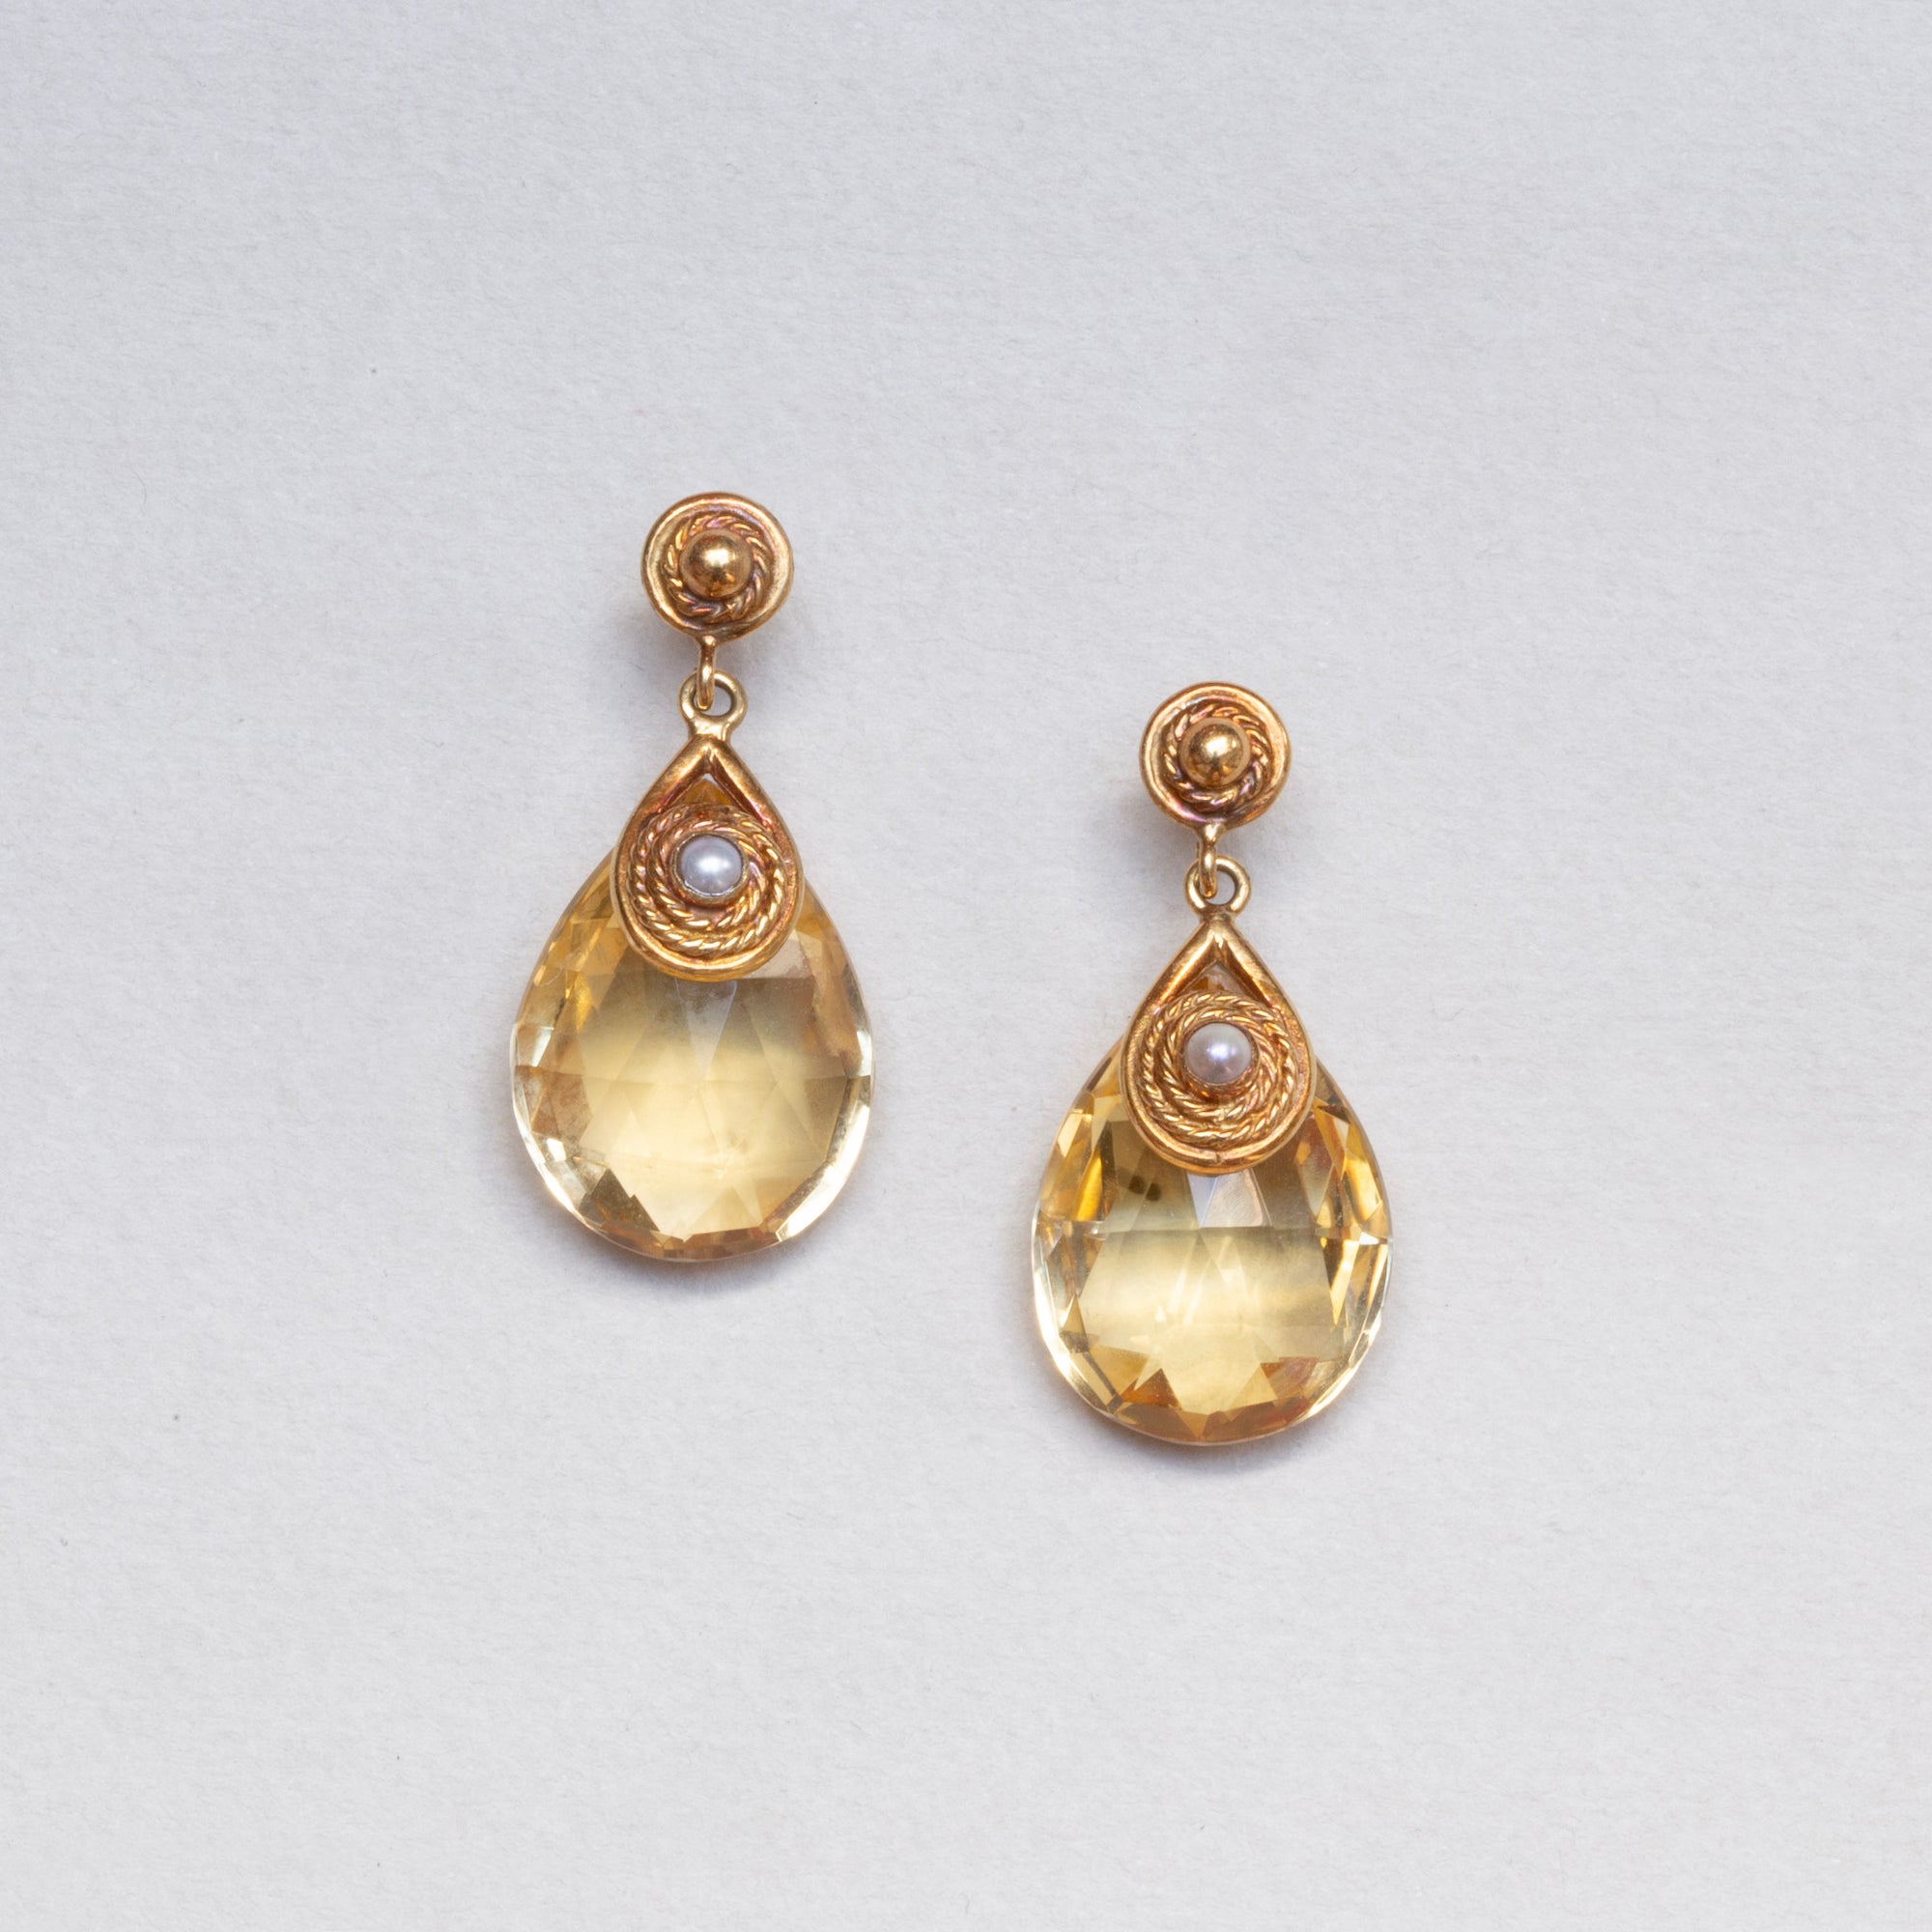 Vintage Drop Earrings with Citrine and Pearl